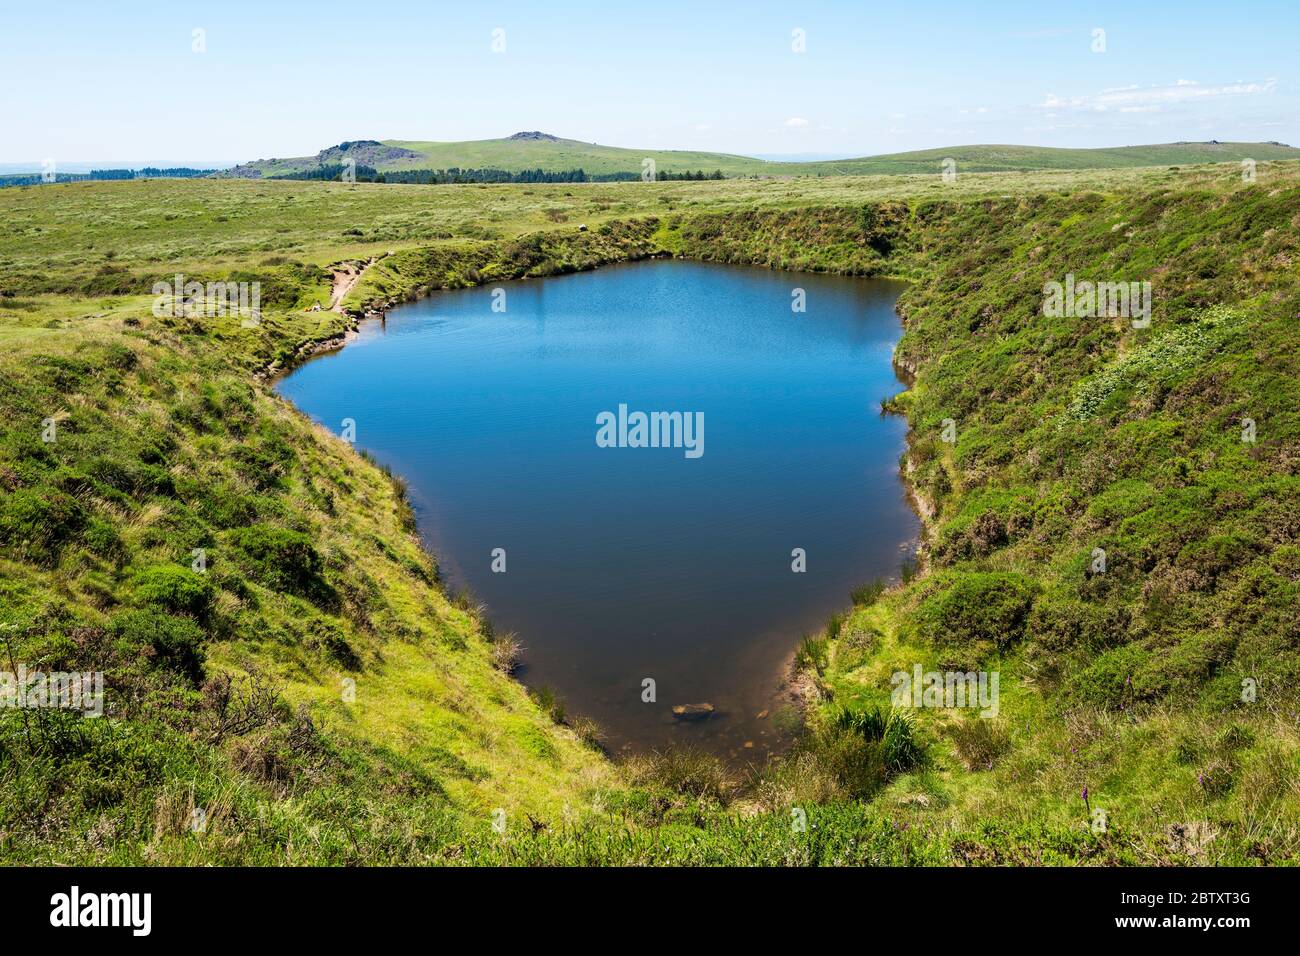 Crazywell Pool is a pond in Dartmoor National Park between Whiteworks and Burrator. Likely created by historic tin mining excavations.   Devon, UK. Stock Photo